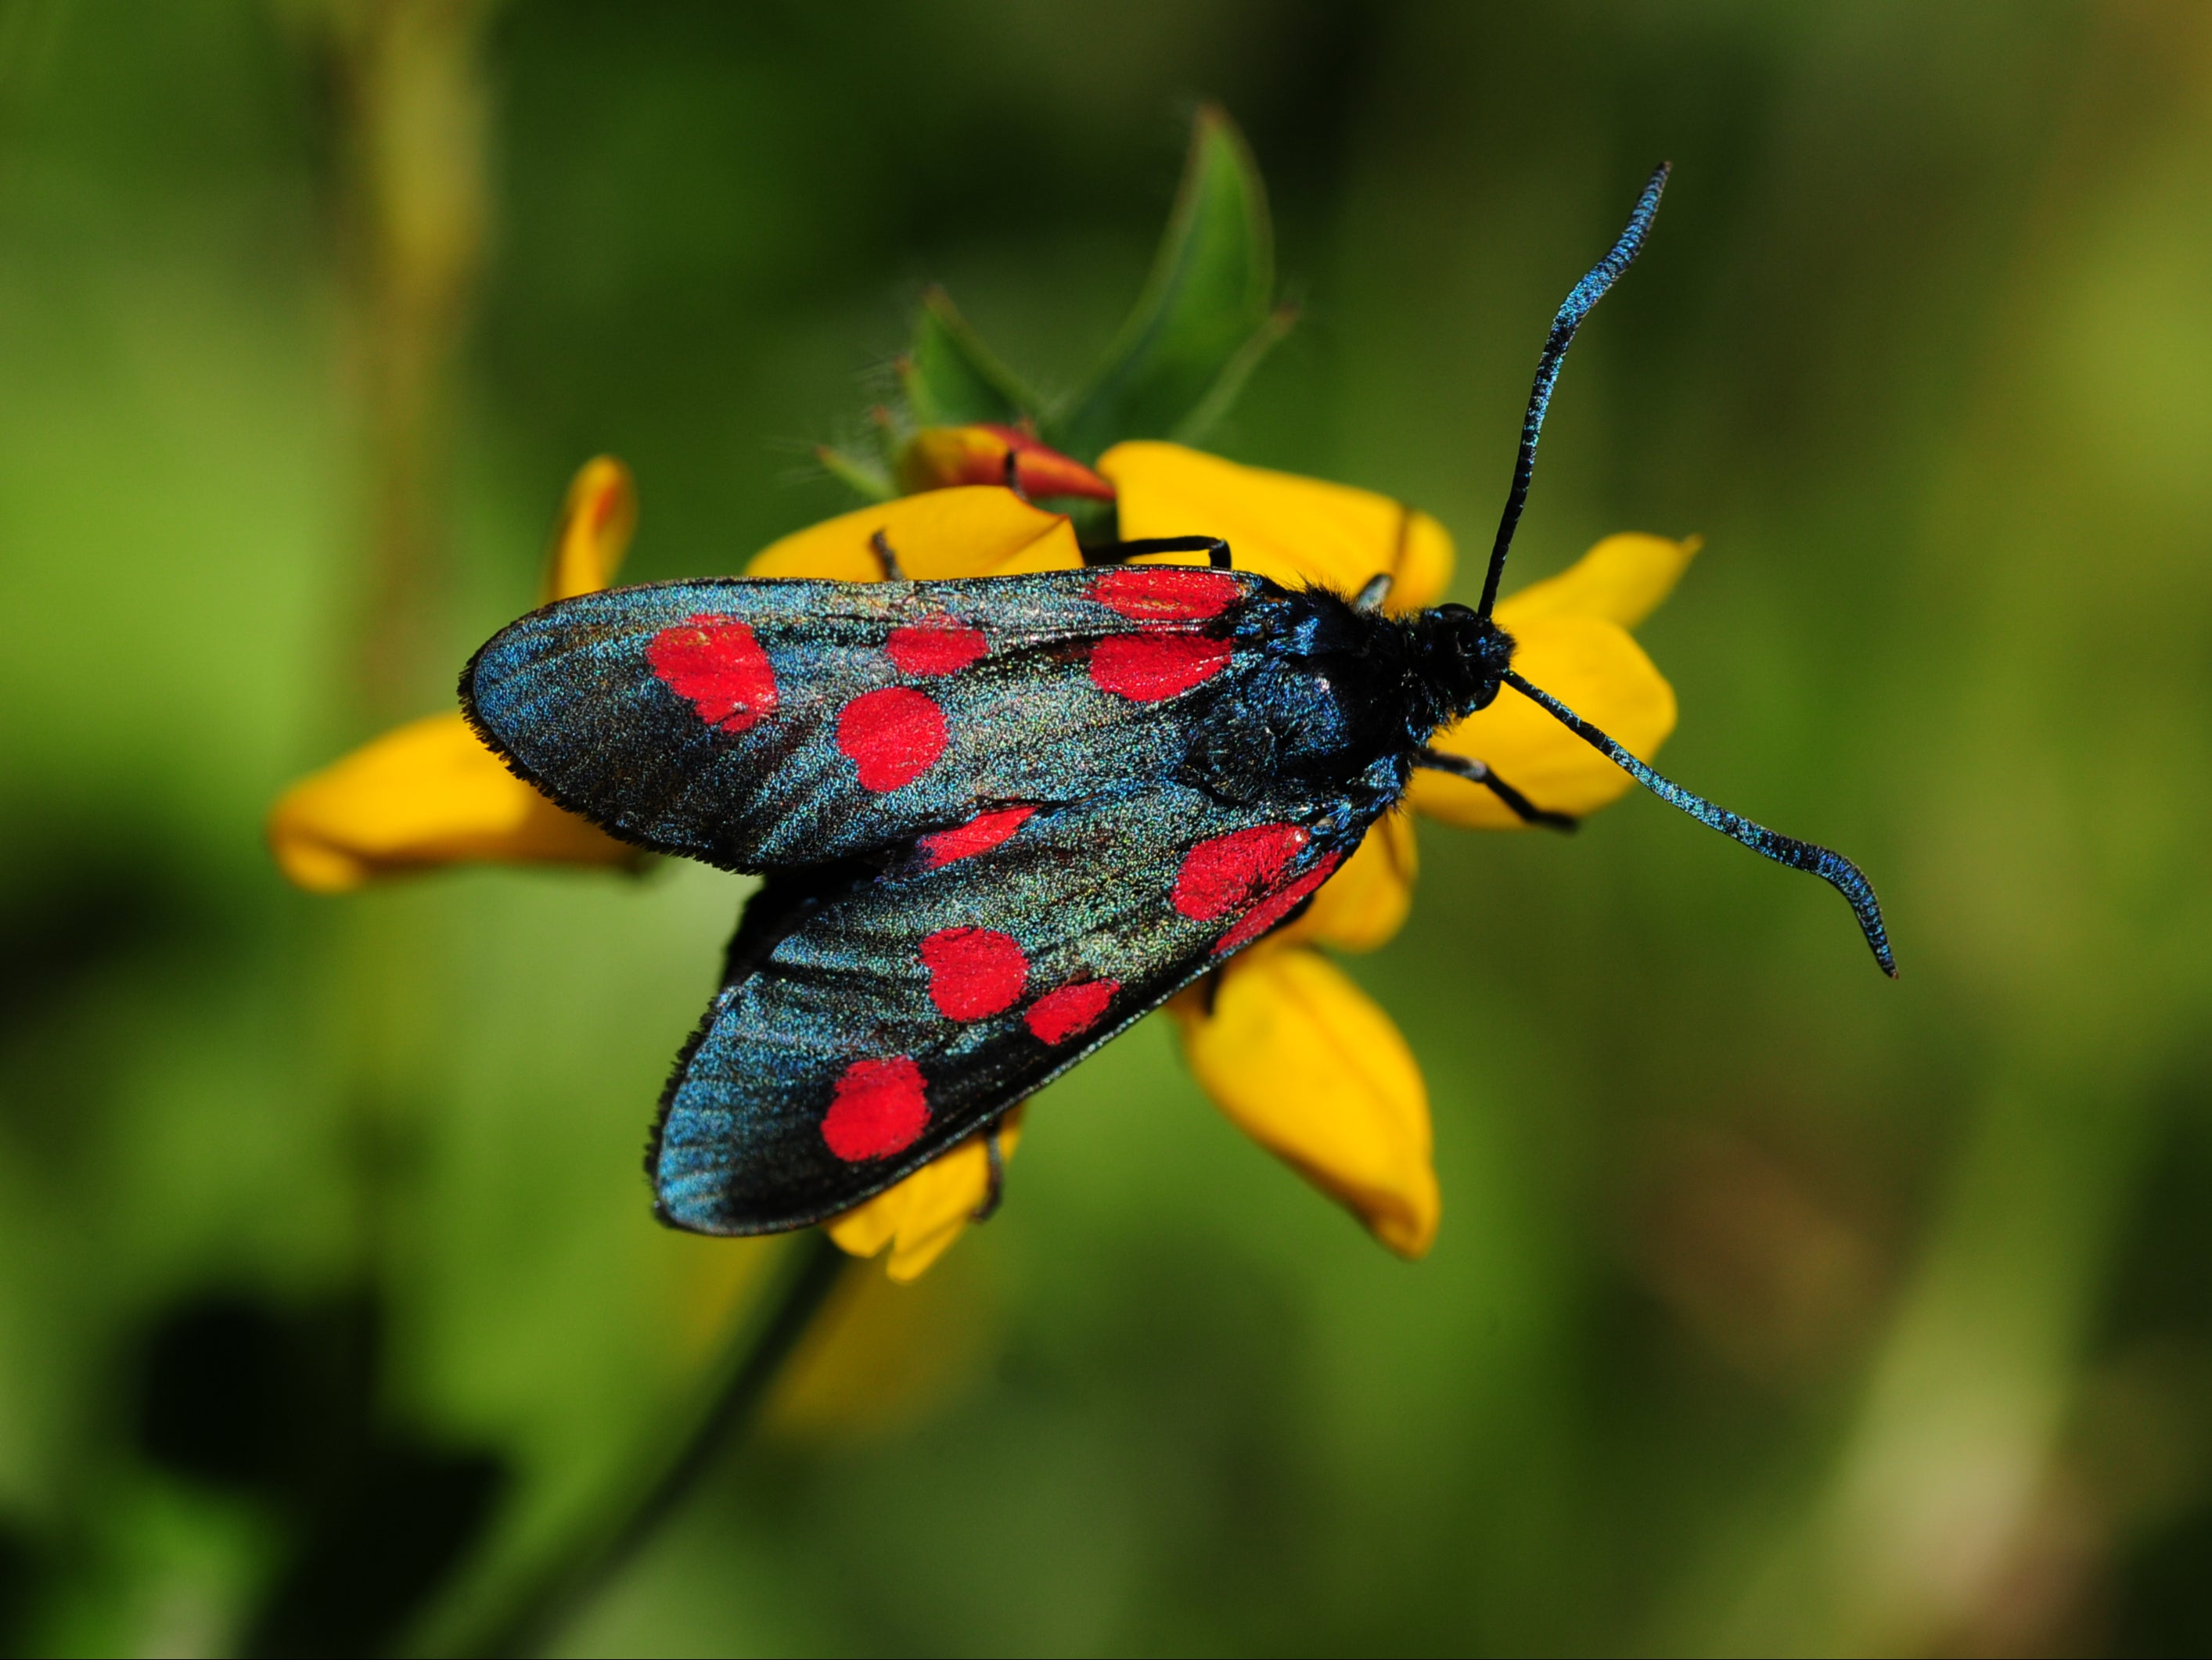 A six spot burnet moth in the UK. Scientists say numbers of moths in Britain have declined by a third in 50 years